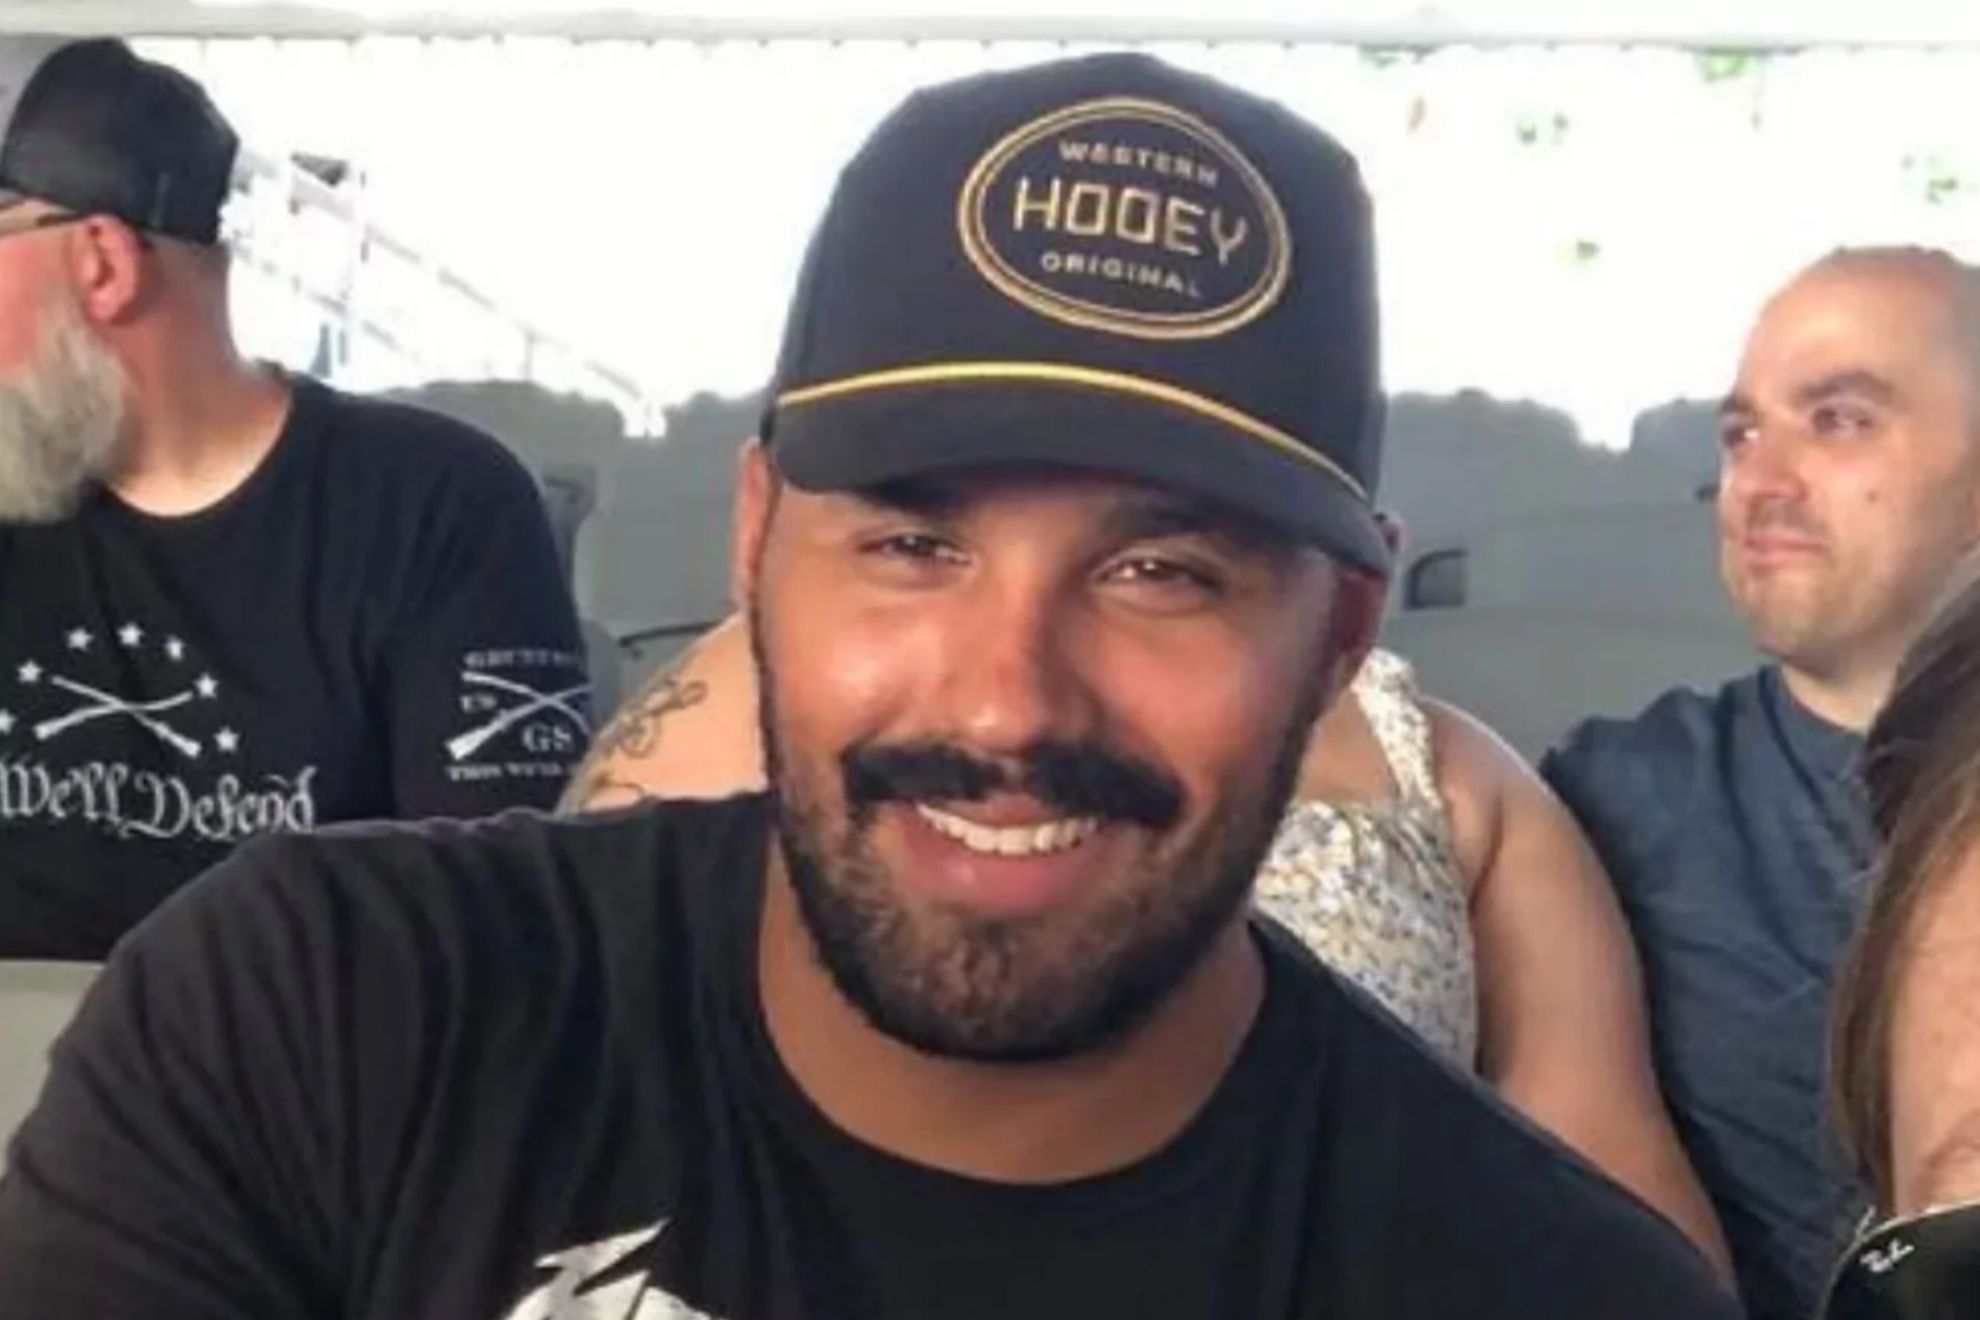 Jacksonville Jaguars assistant coach Kevin Maxen comes out as openly gay: I  want to live and not be afraid